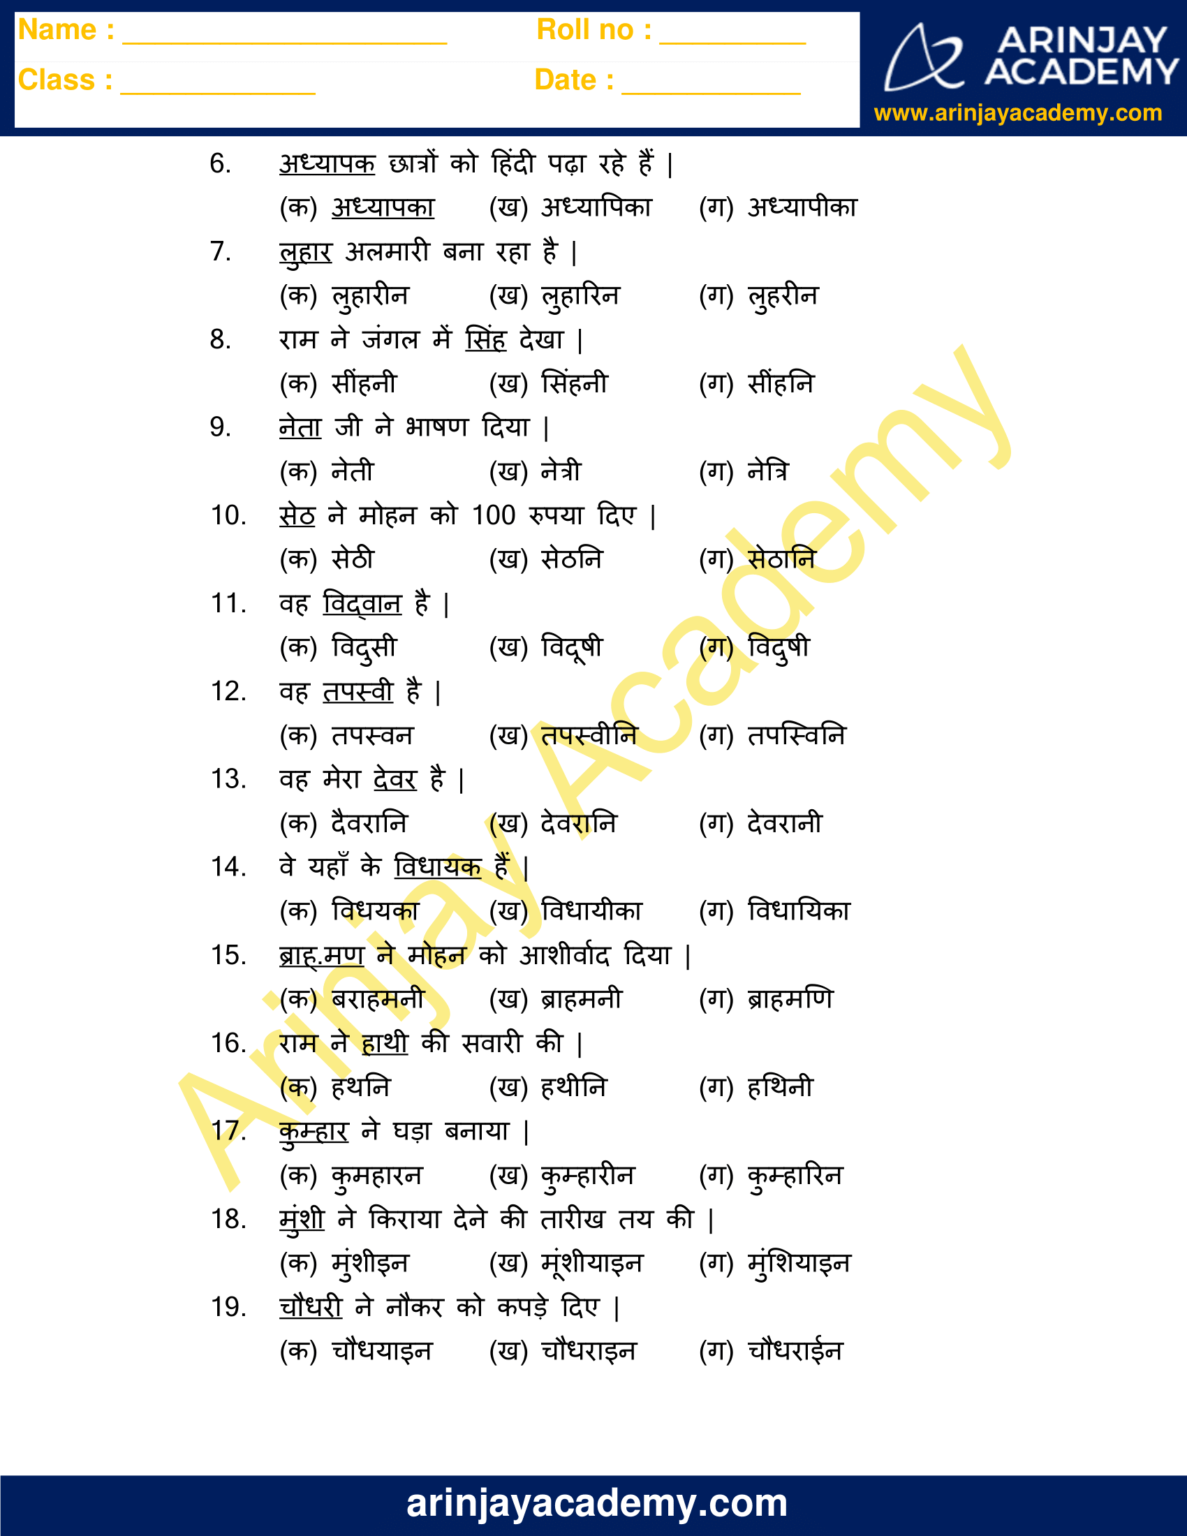 ling in hindi class 5 worksheet free and printable arinjay academy